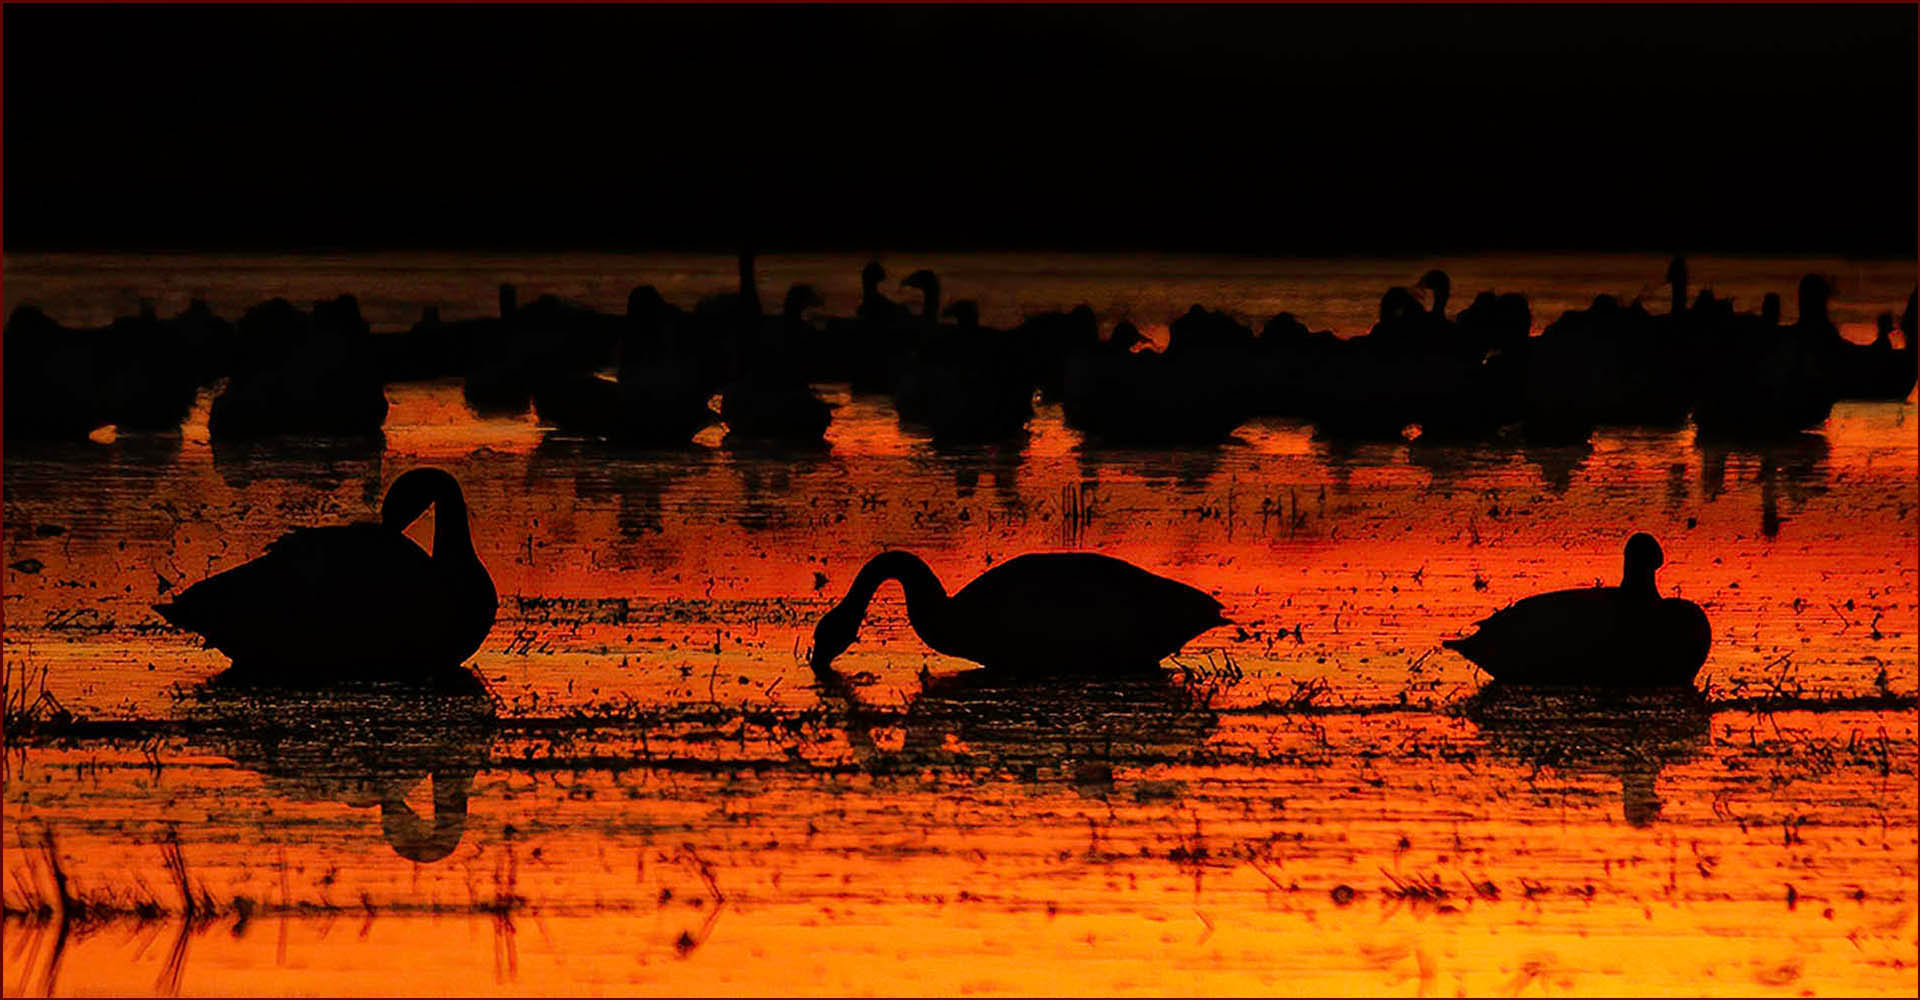 Tundra Swans at Sunset by Donna Sturla